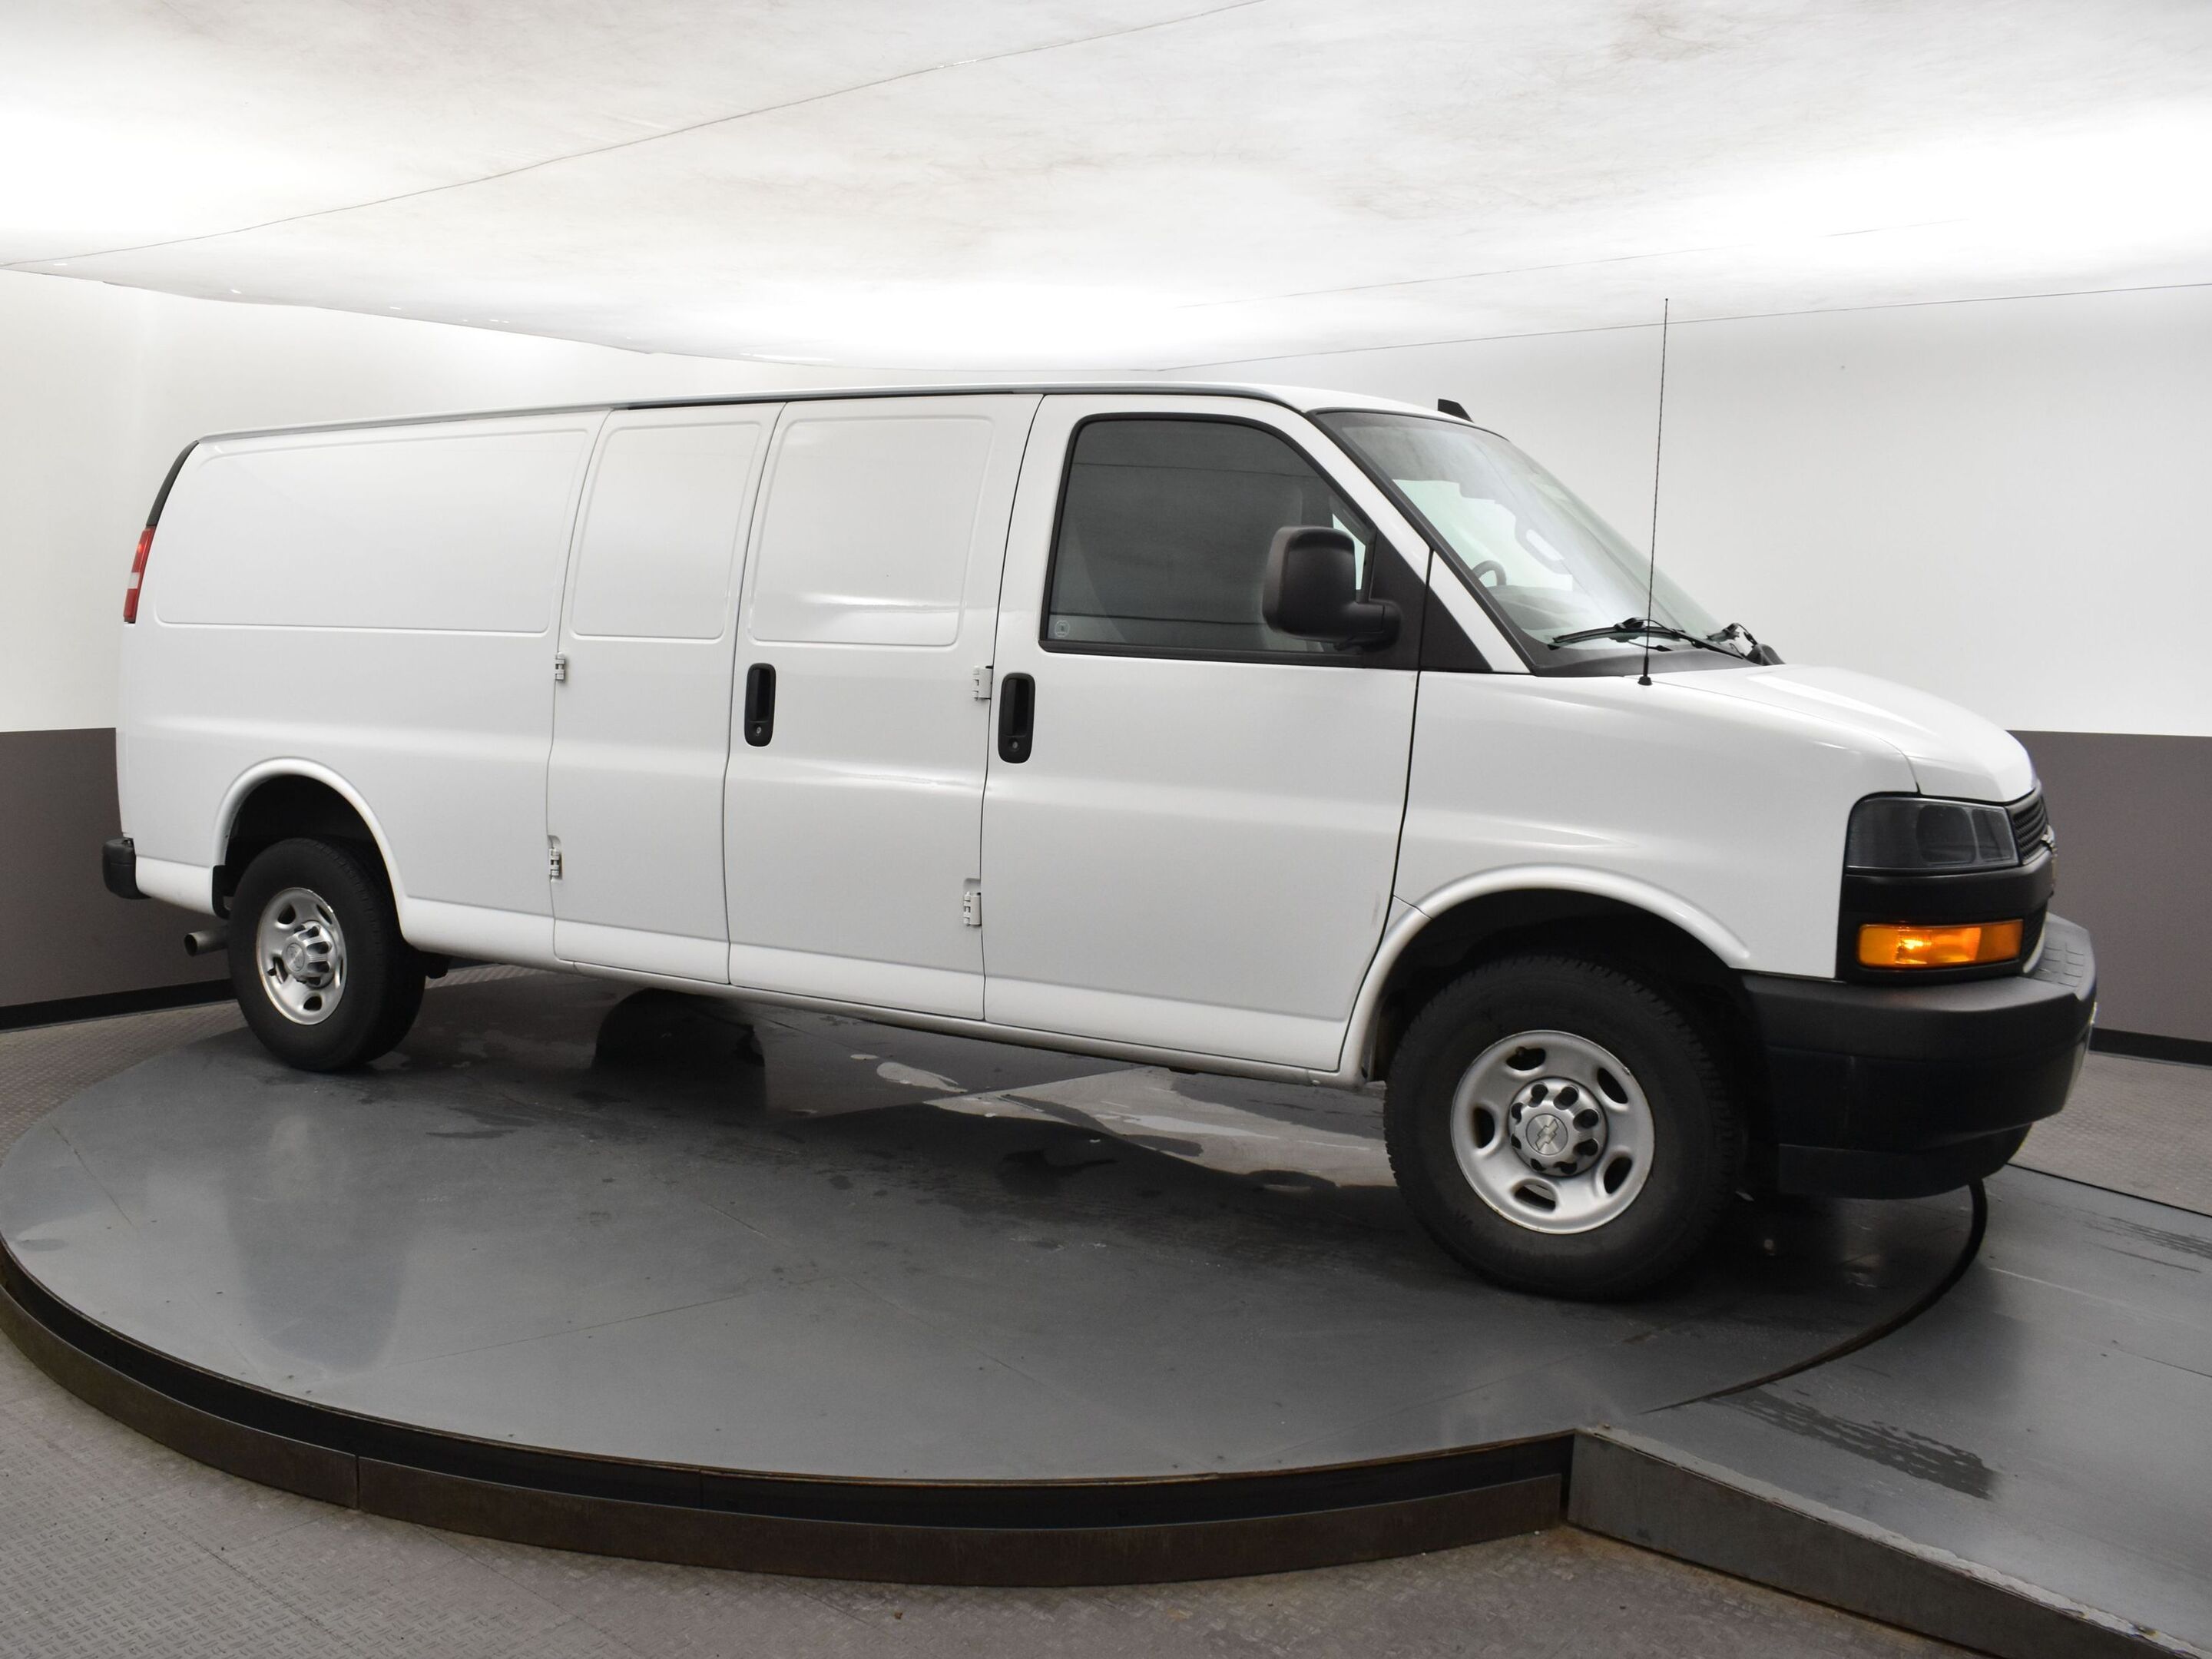 2020 Chevrolet Express text 902-200-4475 for info